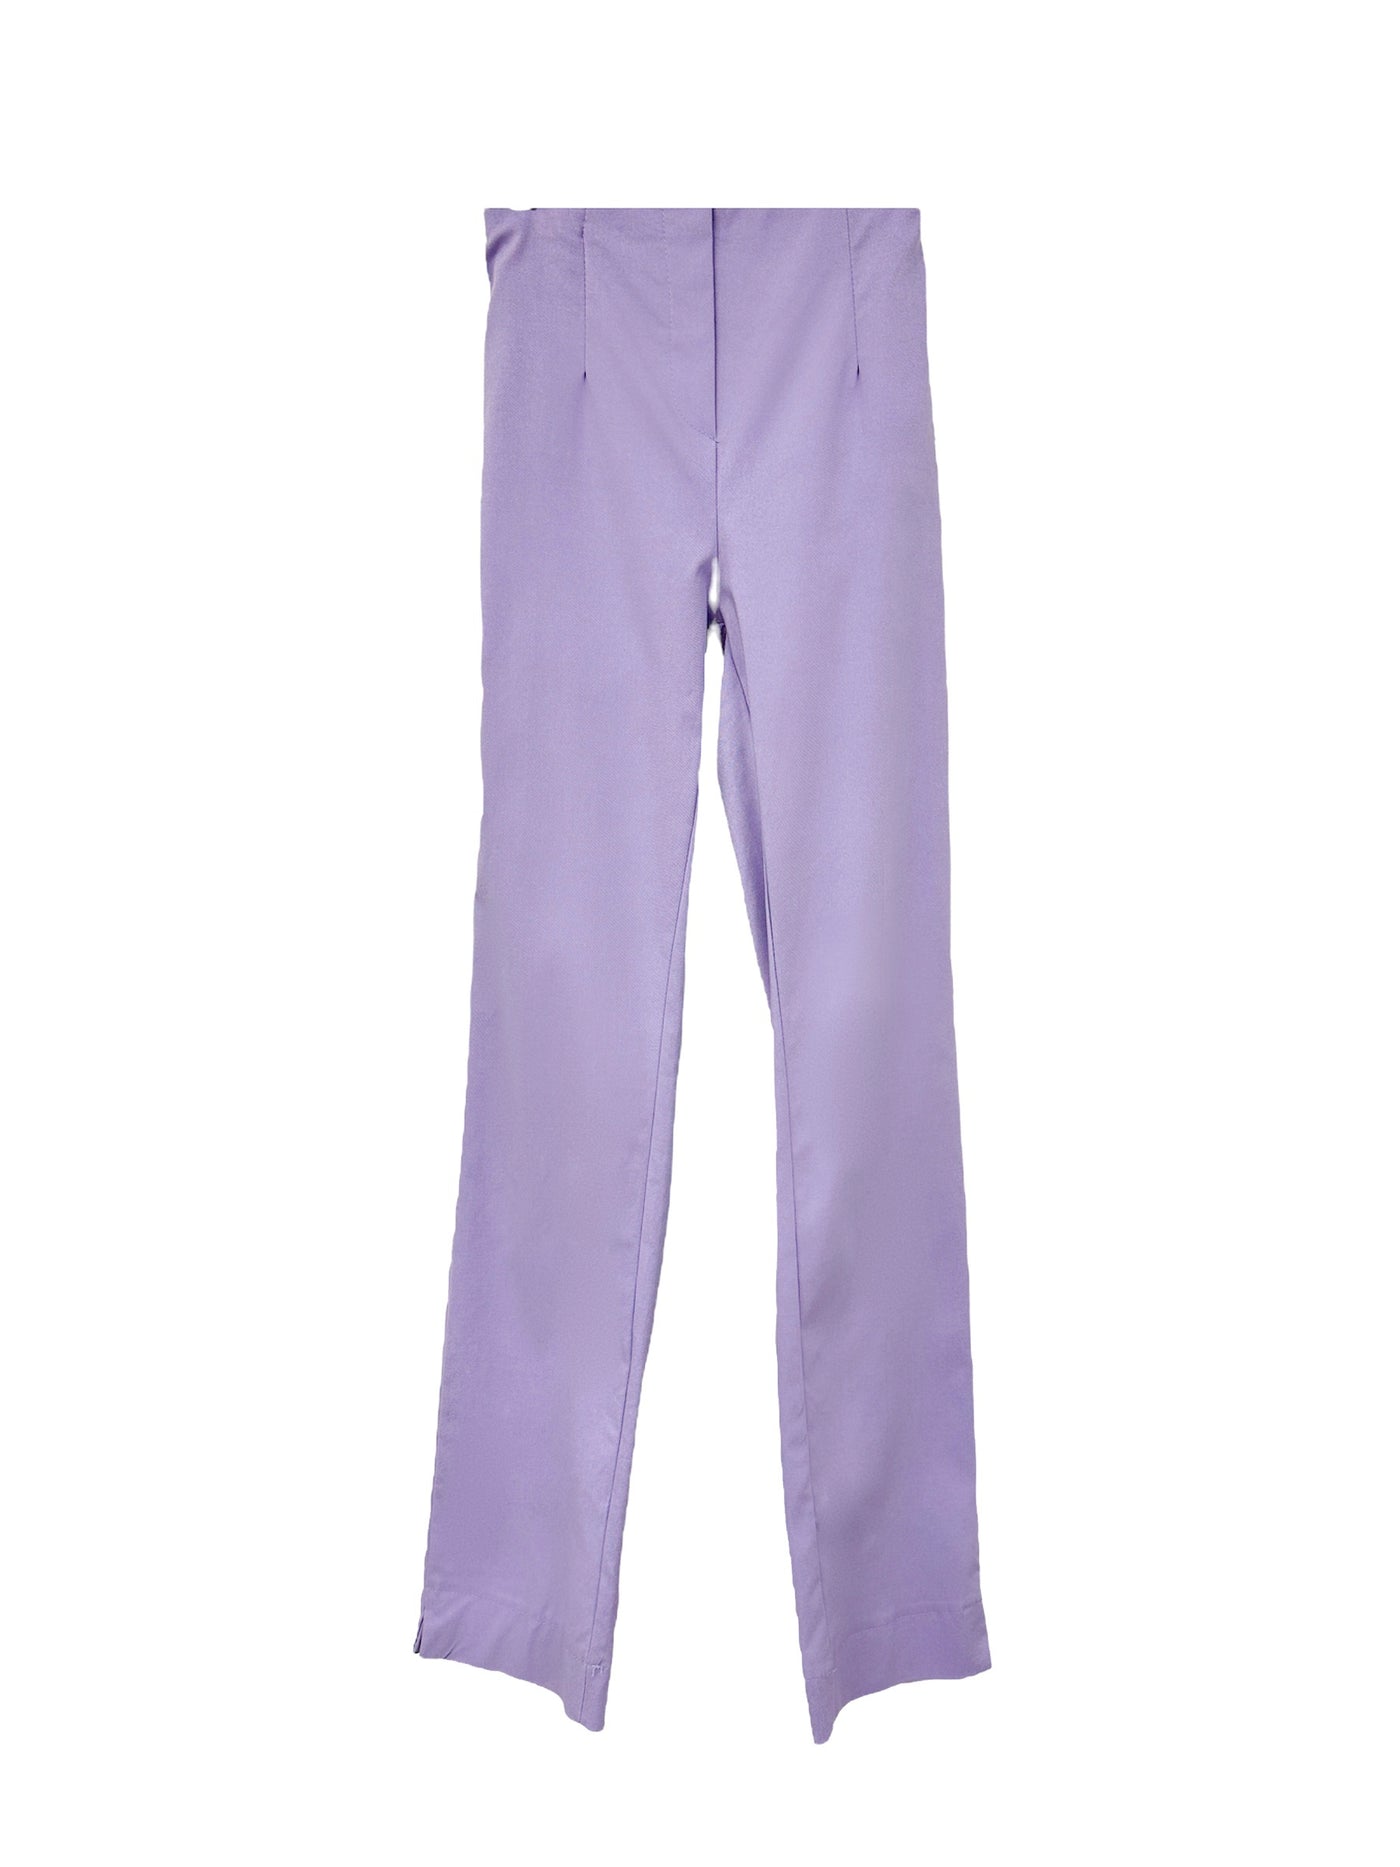 Lilac Straight Leg Trousers with Elasticated Waist